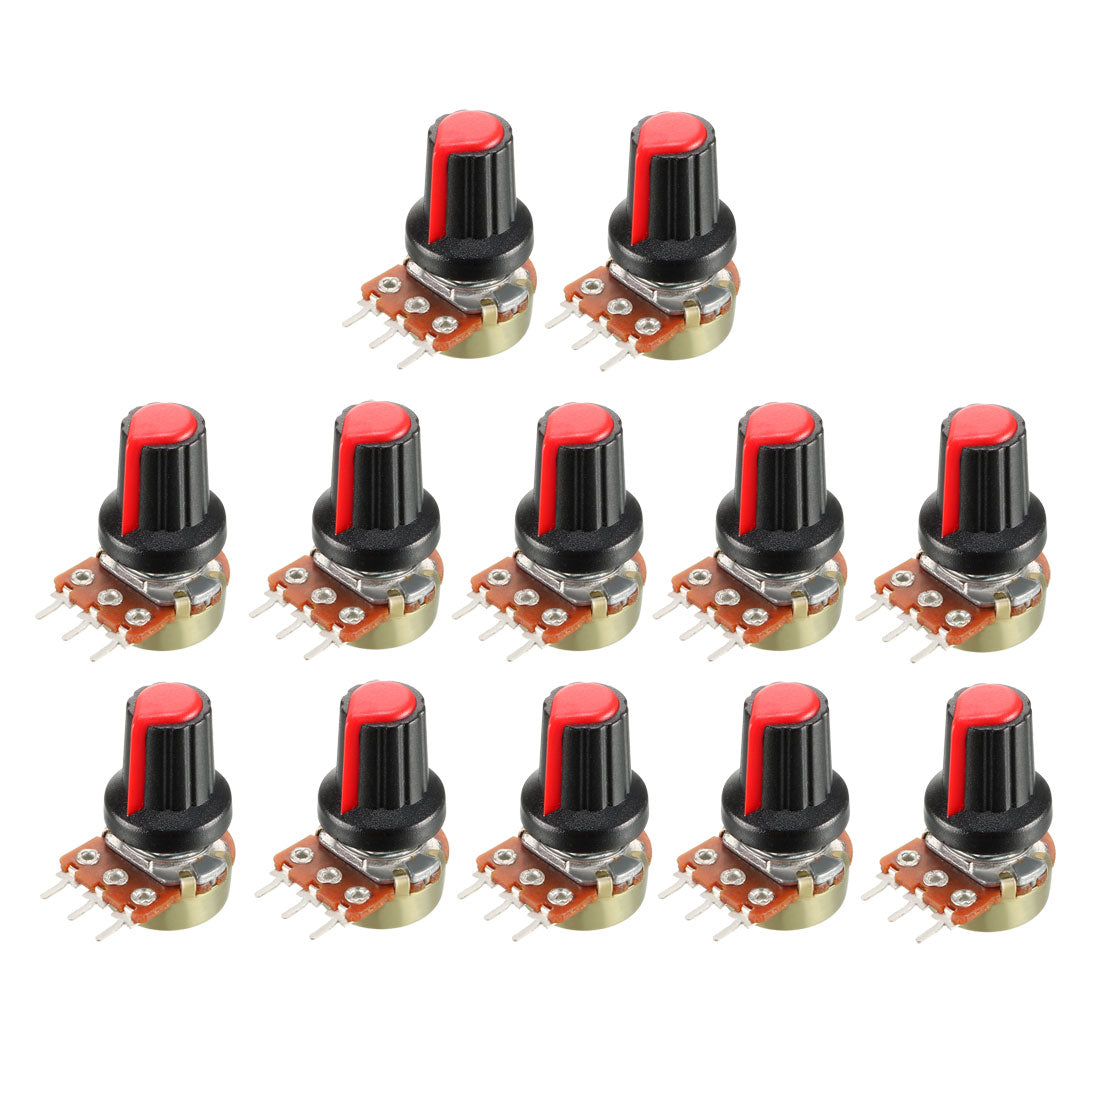 uxcell Uxcell 12Pcs 1K Ohm Variable Resistors Single Turn Rotary Carbon Film Taper Potentiometer with Knobs